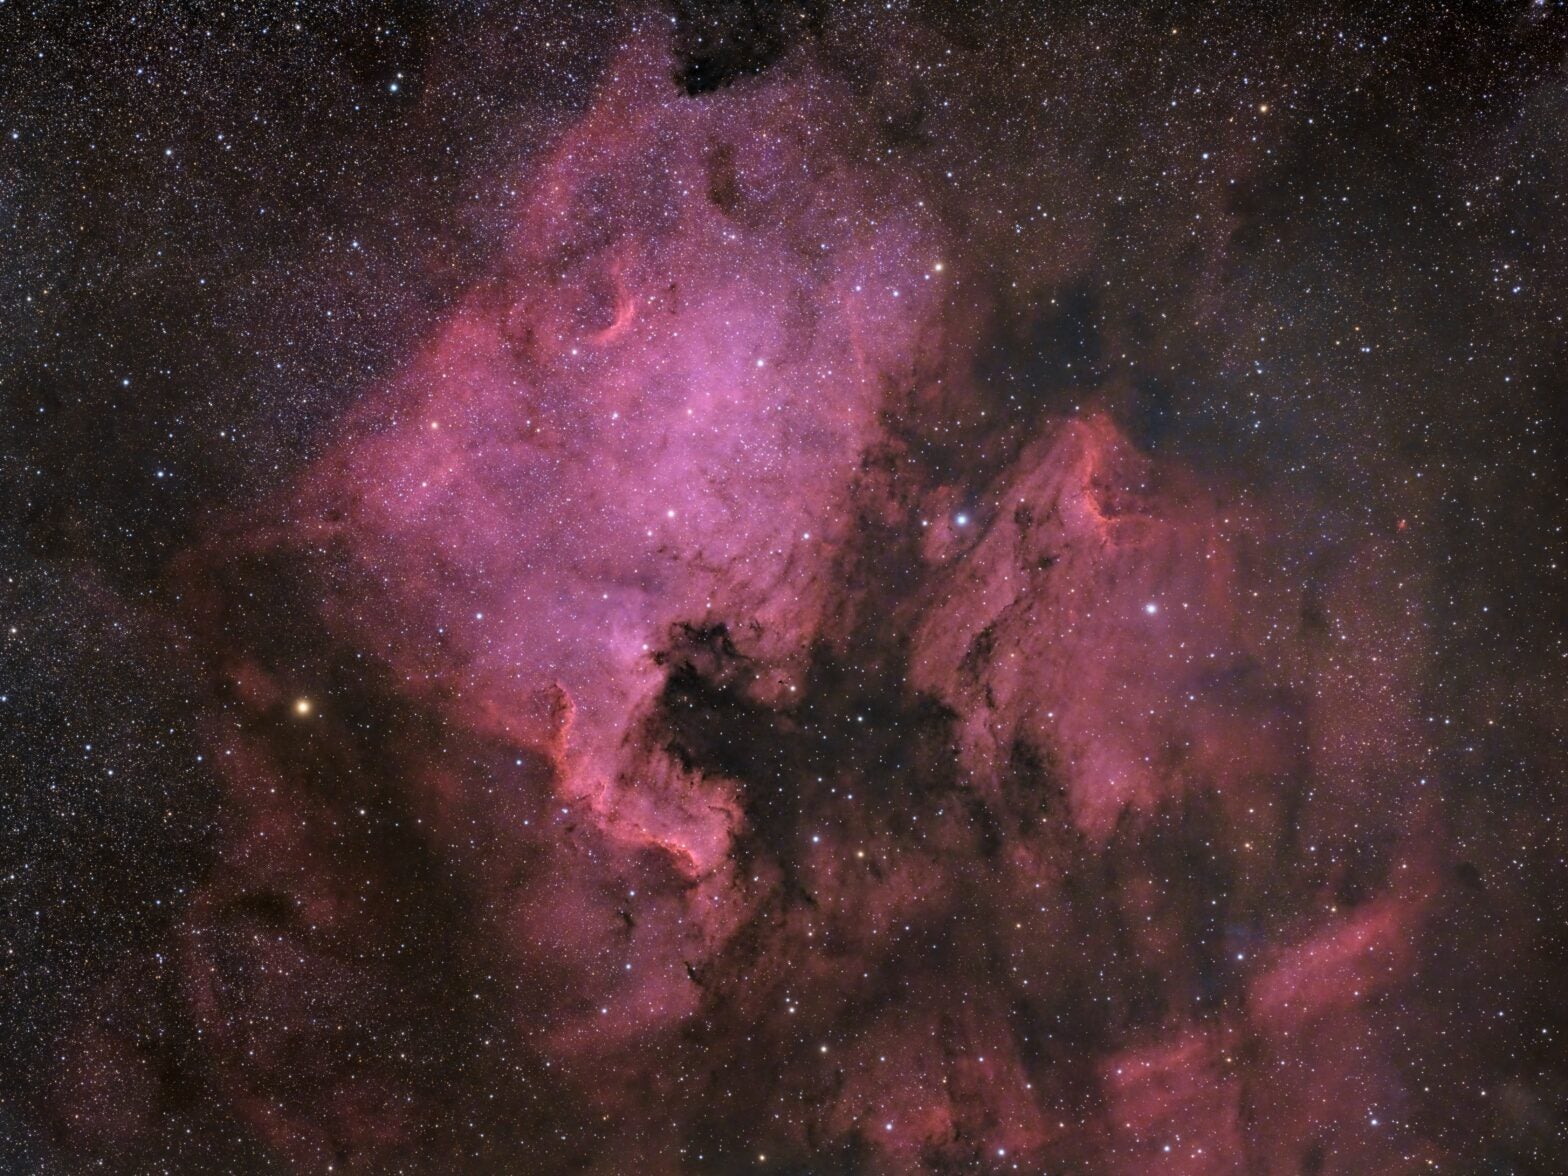 Two glowing, red-magenta clouds of hydrogen gas — emission nebulae — lie in the frame. On the left lies the North America Nebulae (NGC 7000), appearing in the shape of the North American continent. On the right is the Pelican Nebula (IC 5070), appearing like the head of a pelican seen in profile.